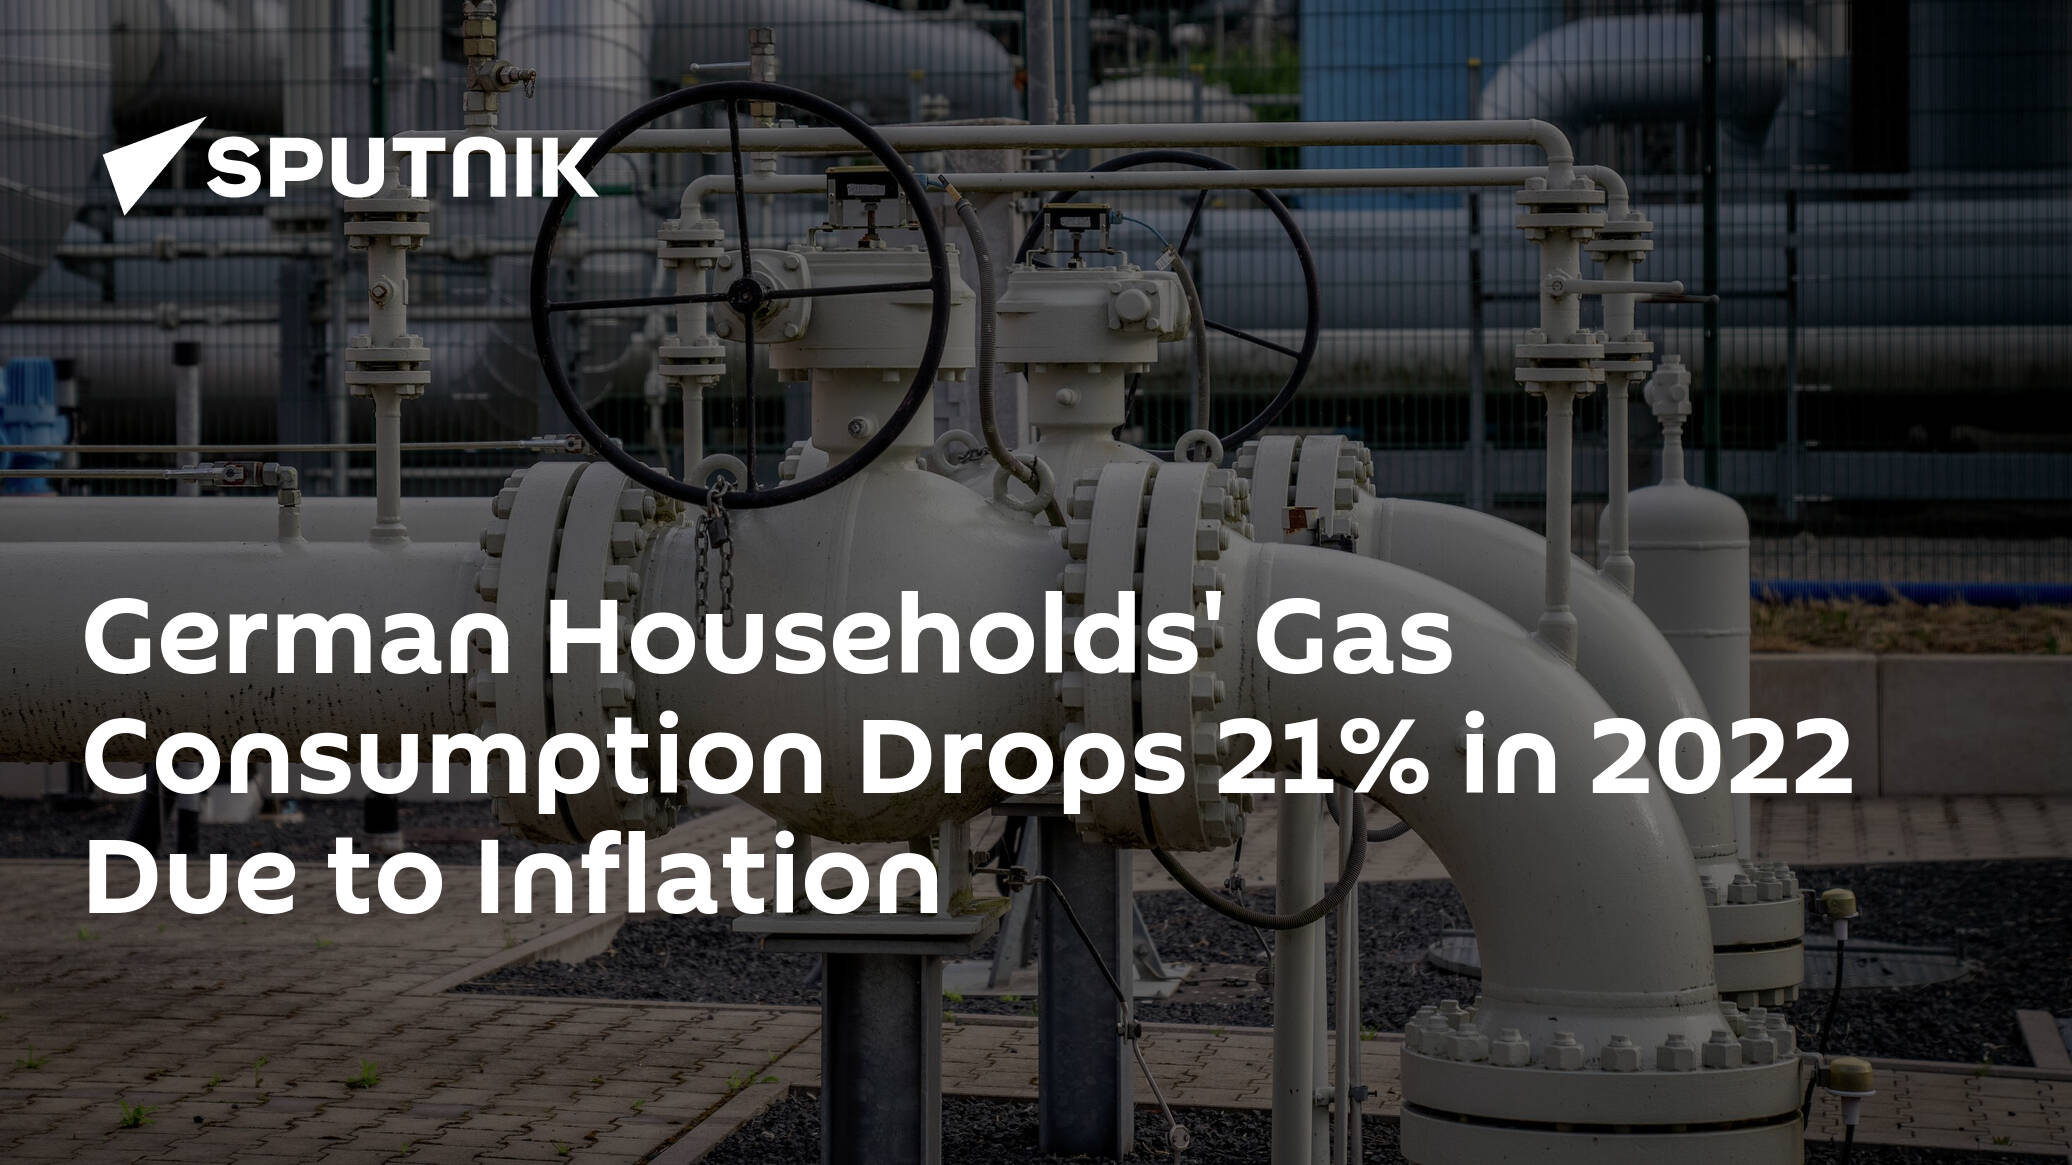 German Households' Gas Consumption Drops 21% in 2022 Due to Inflation